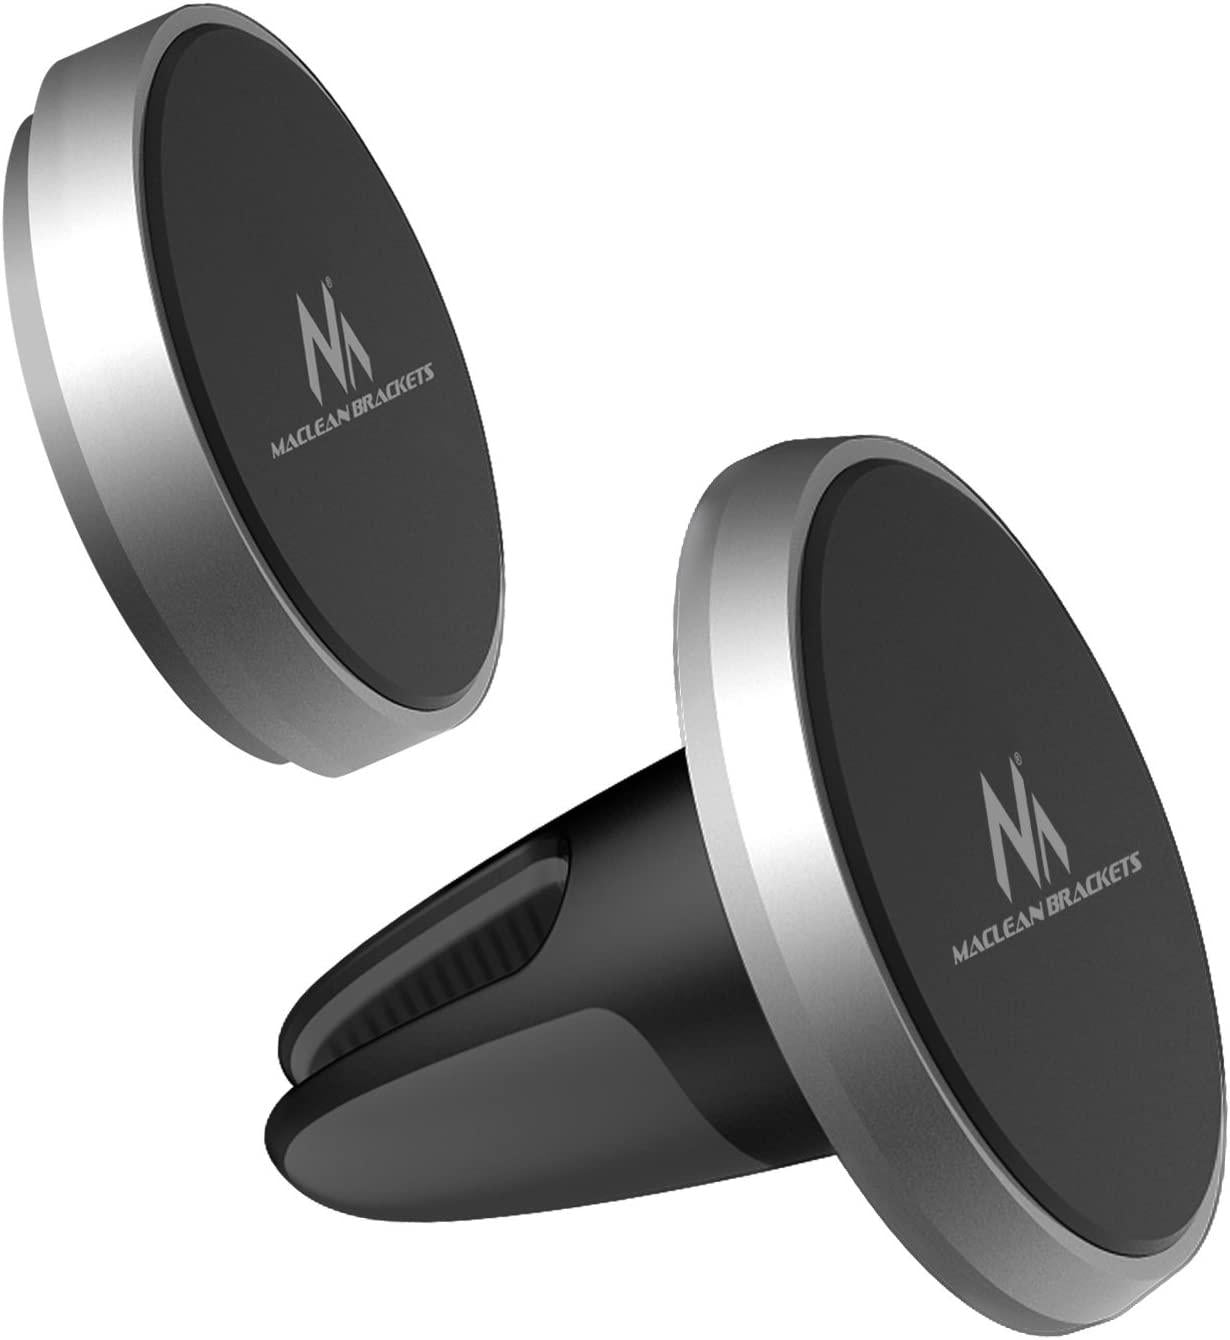 Maclean, Maclean MC 746Â 2X Magnetic Phone Holder Magnetic Mount for The Car or Home